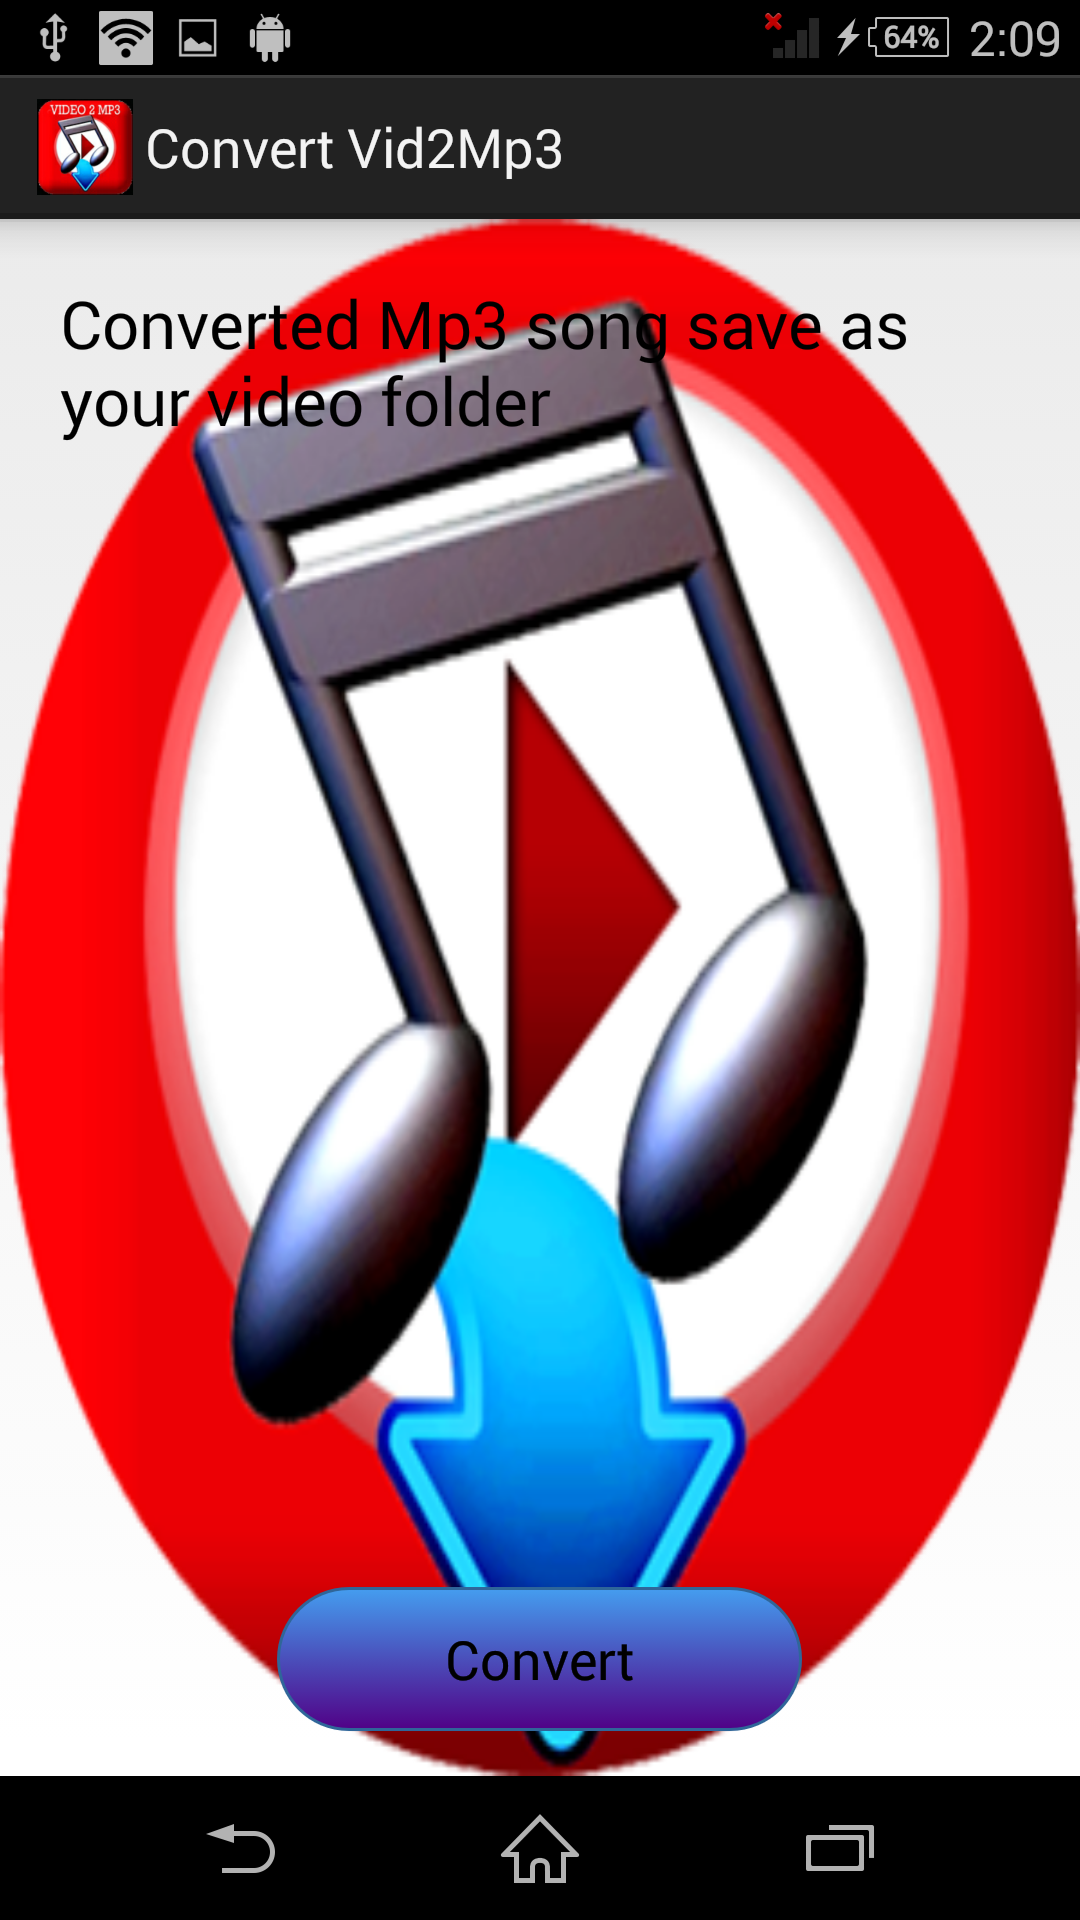 Video Mp3 Converter APK 2.0 for Android – Download Video Mp3 Converter APK  Latest Version from APKFab.com